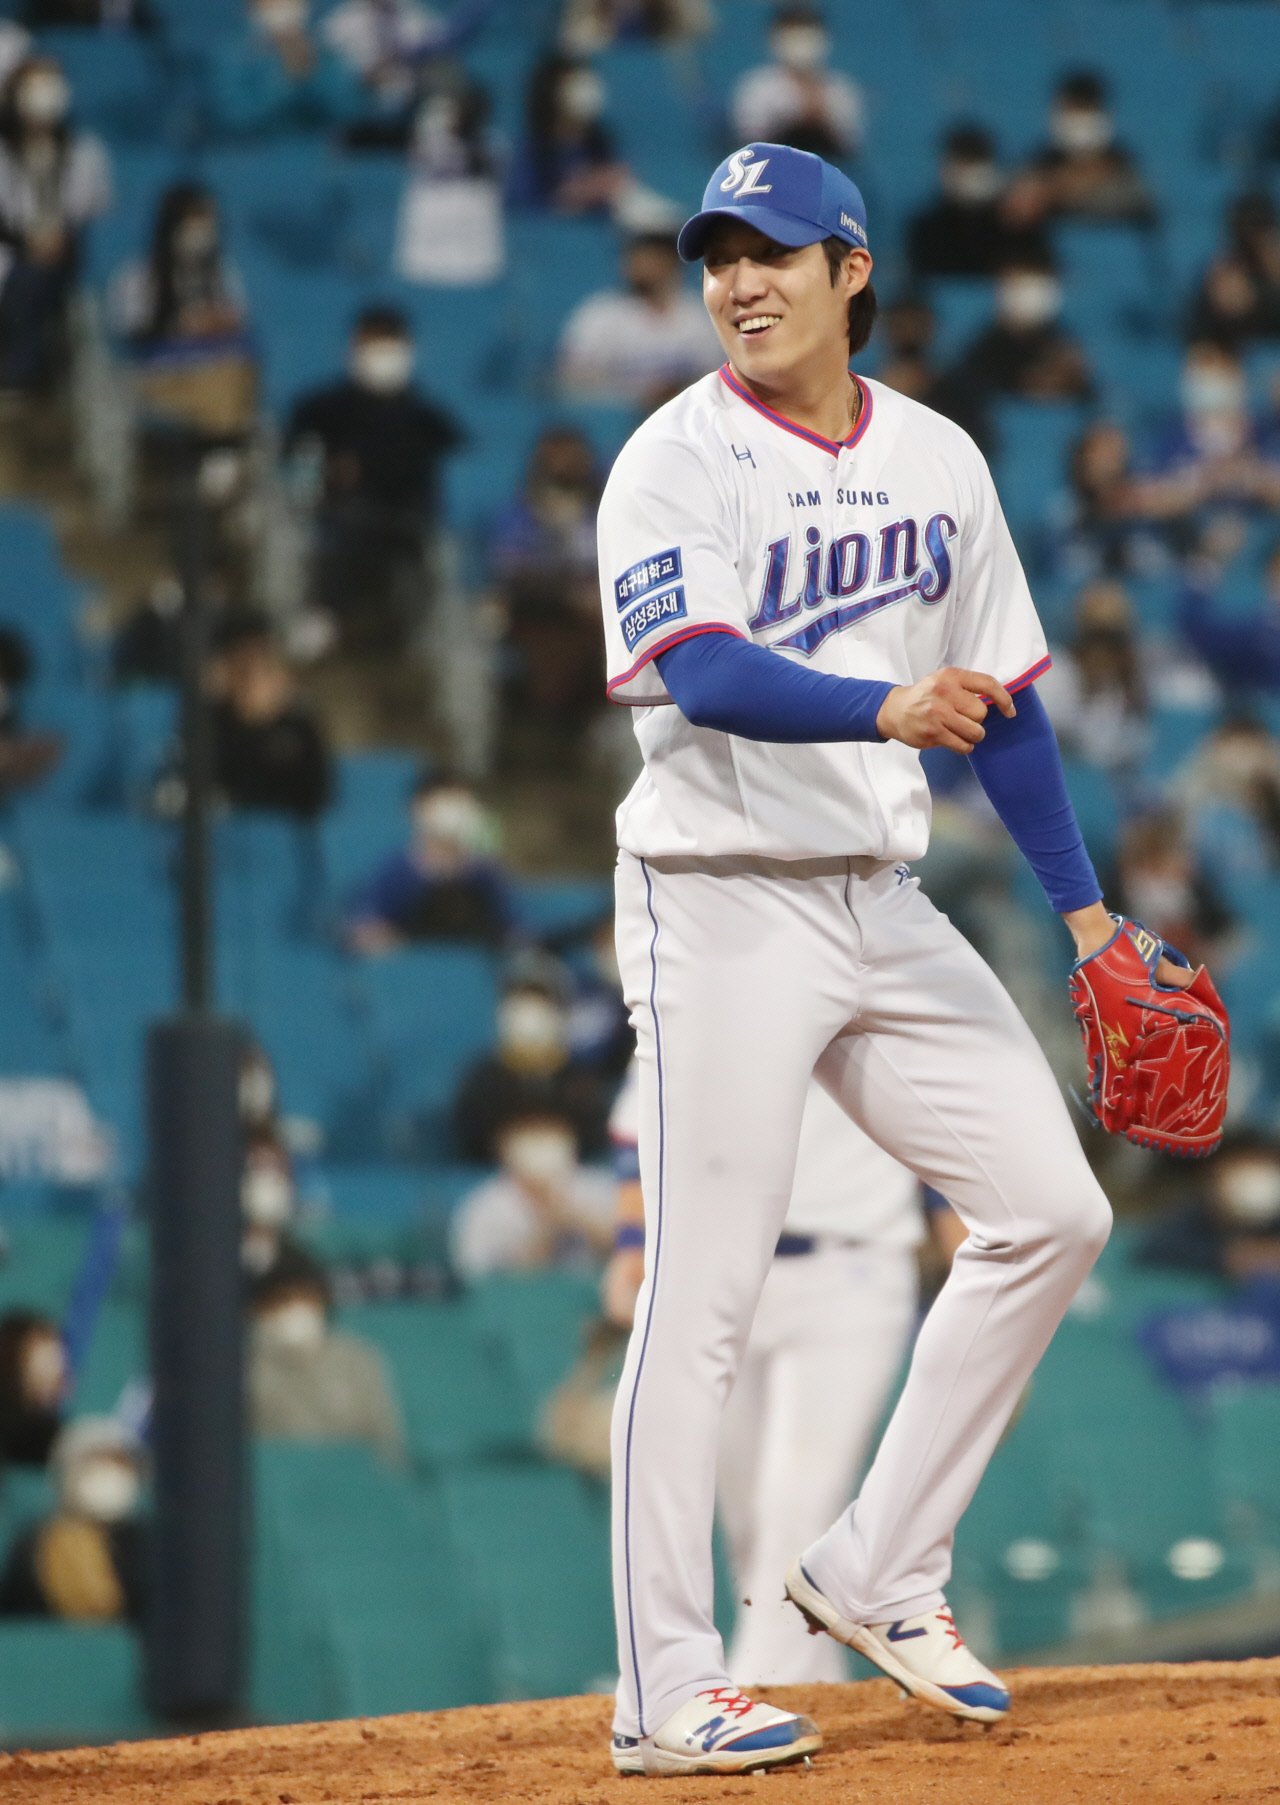 Lessons learned from poor stretch helping young KBO ace in breakout season